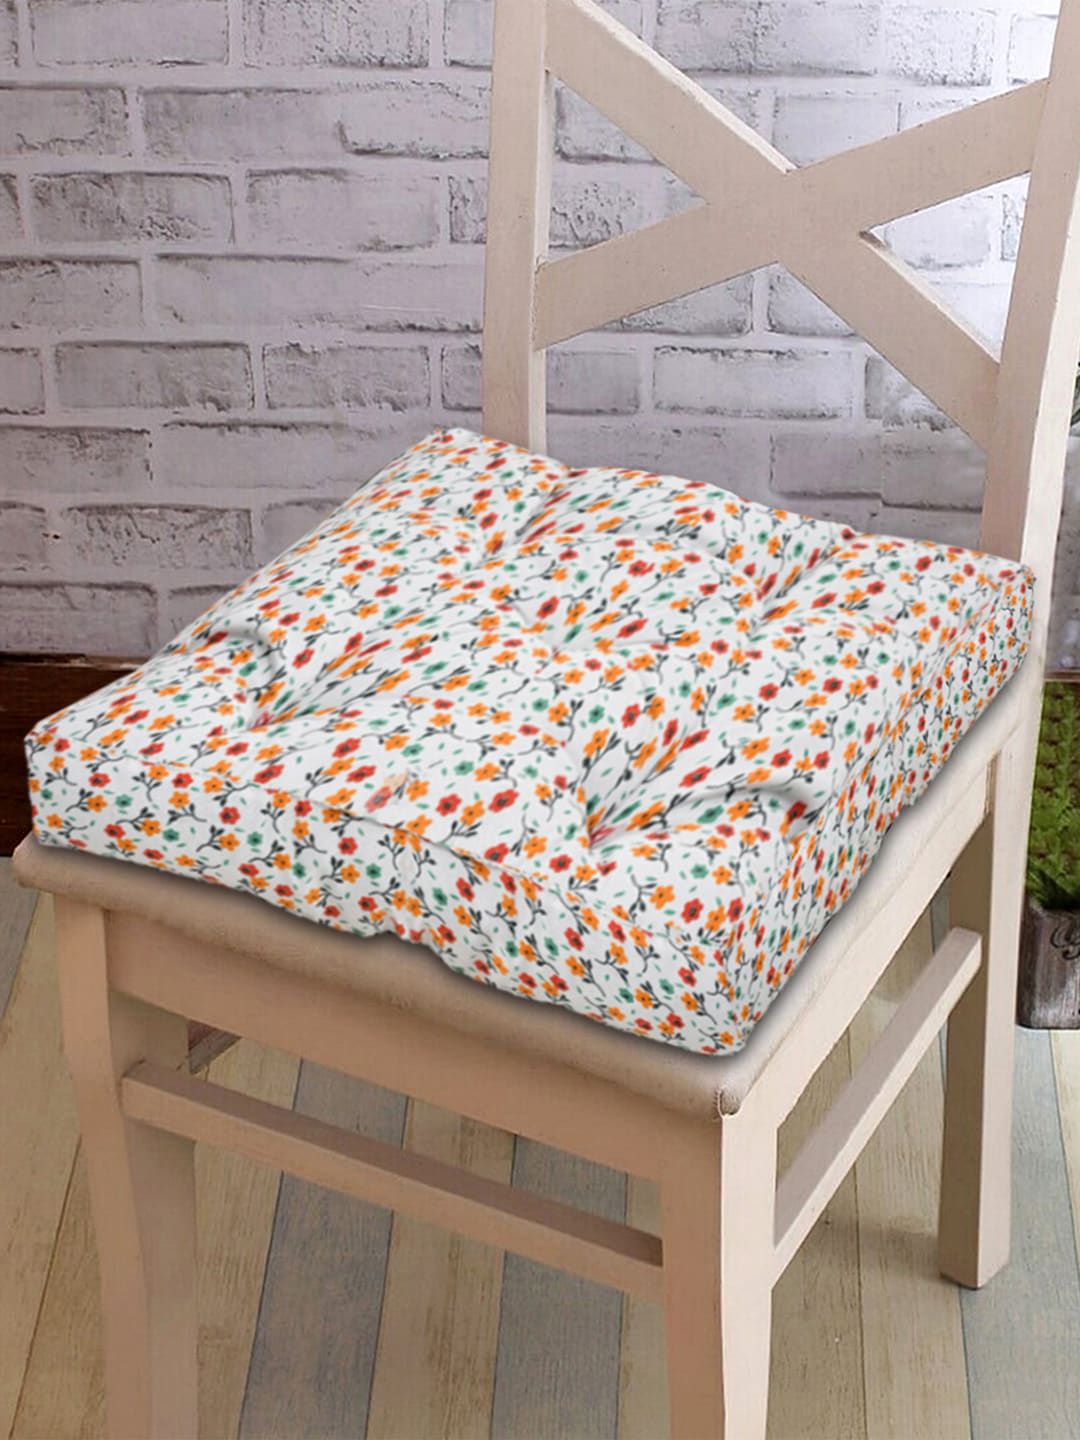 Kuber Industries Set of 4 White & Orange Floral Print Microfiber Square Chair Pads Price in India